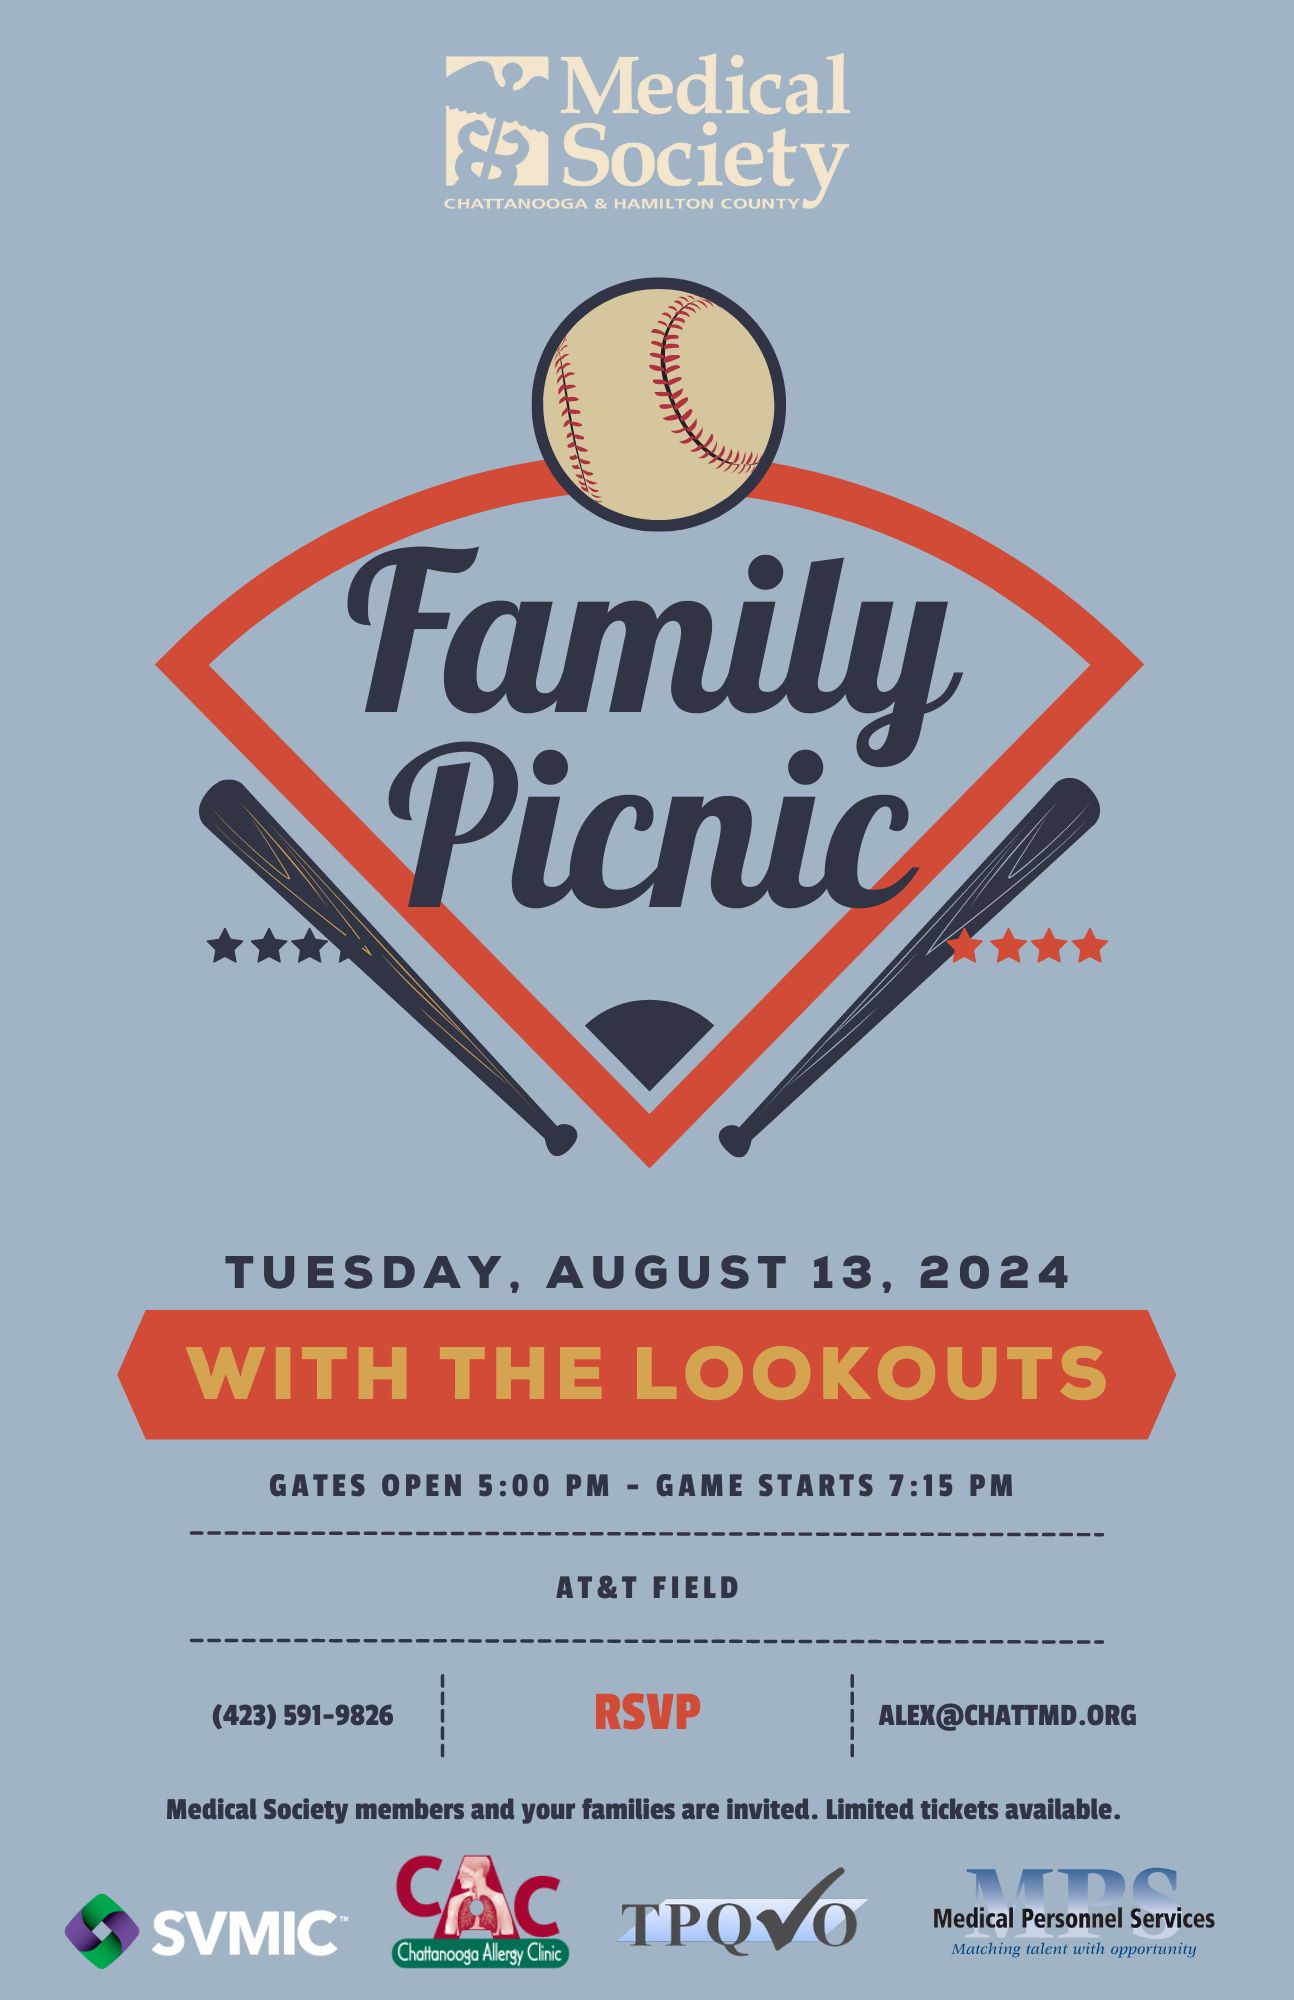 Family Picnic with the Lookouts – RESCHEDULED